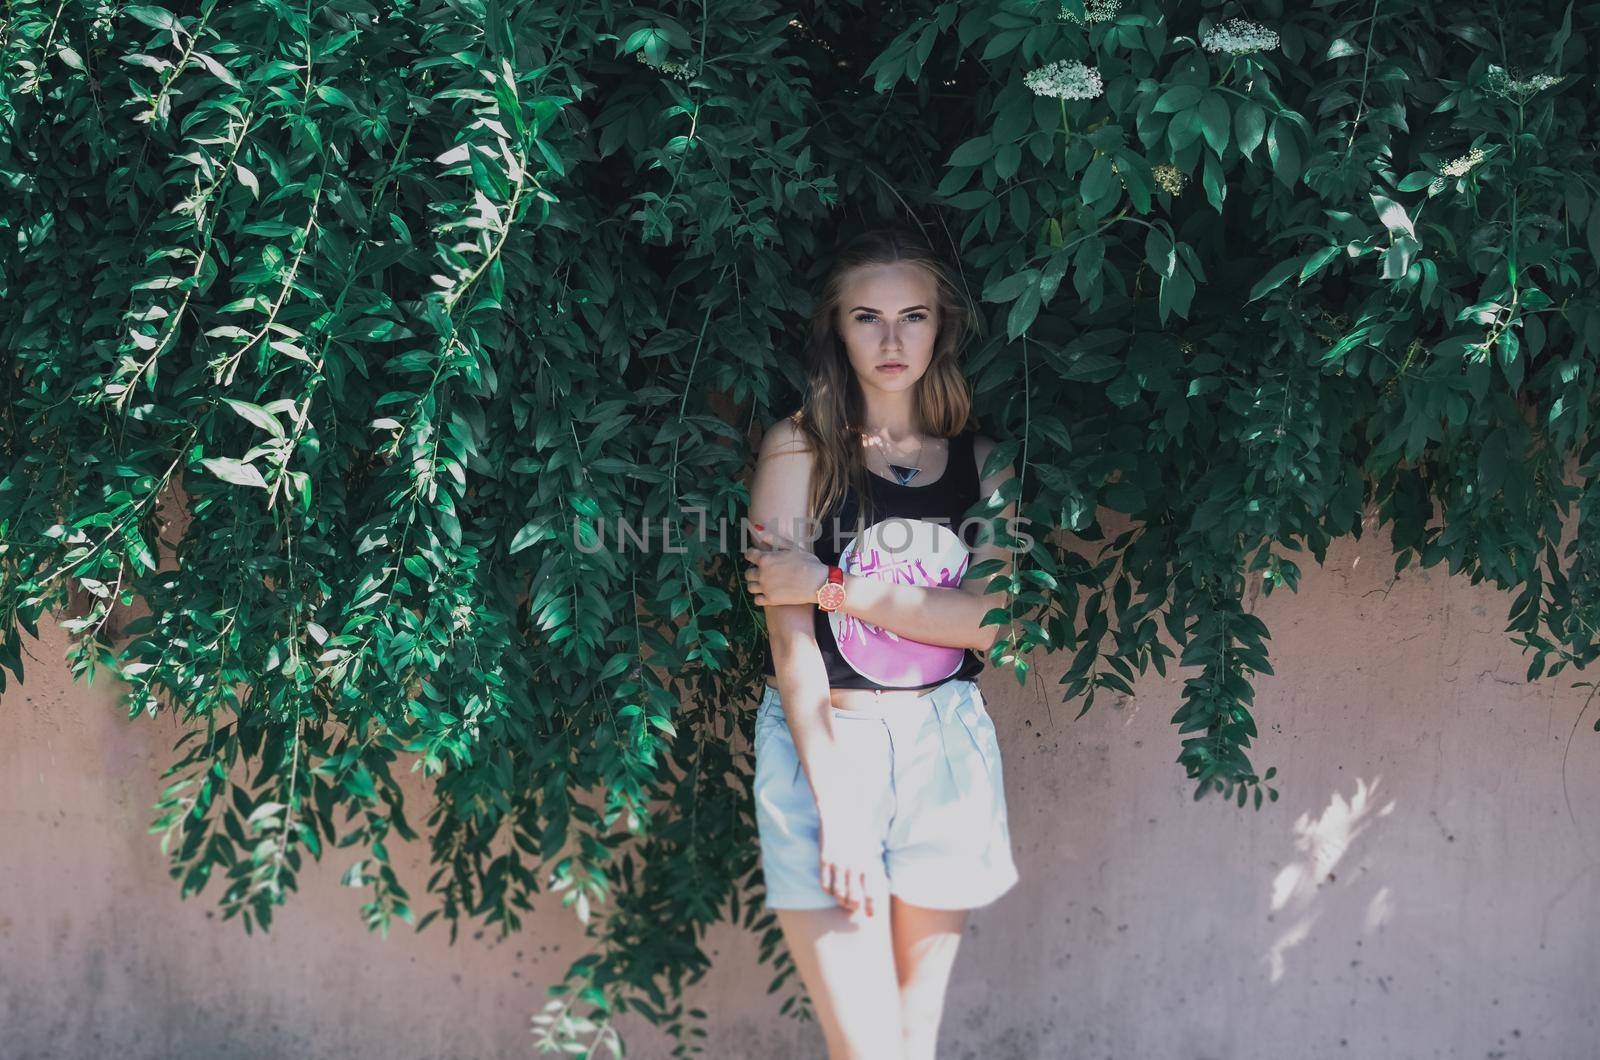 Lovely young blonde girl with long curly hair on a background of green thick leaves. A woman is wearing a cropped black top with a white print and pink lettering and high-waisted shorts.closed eyes